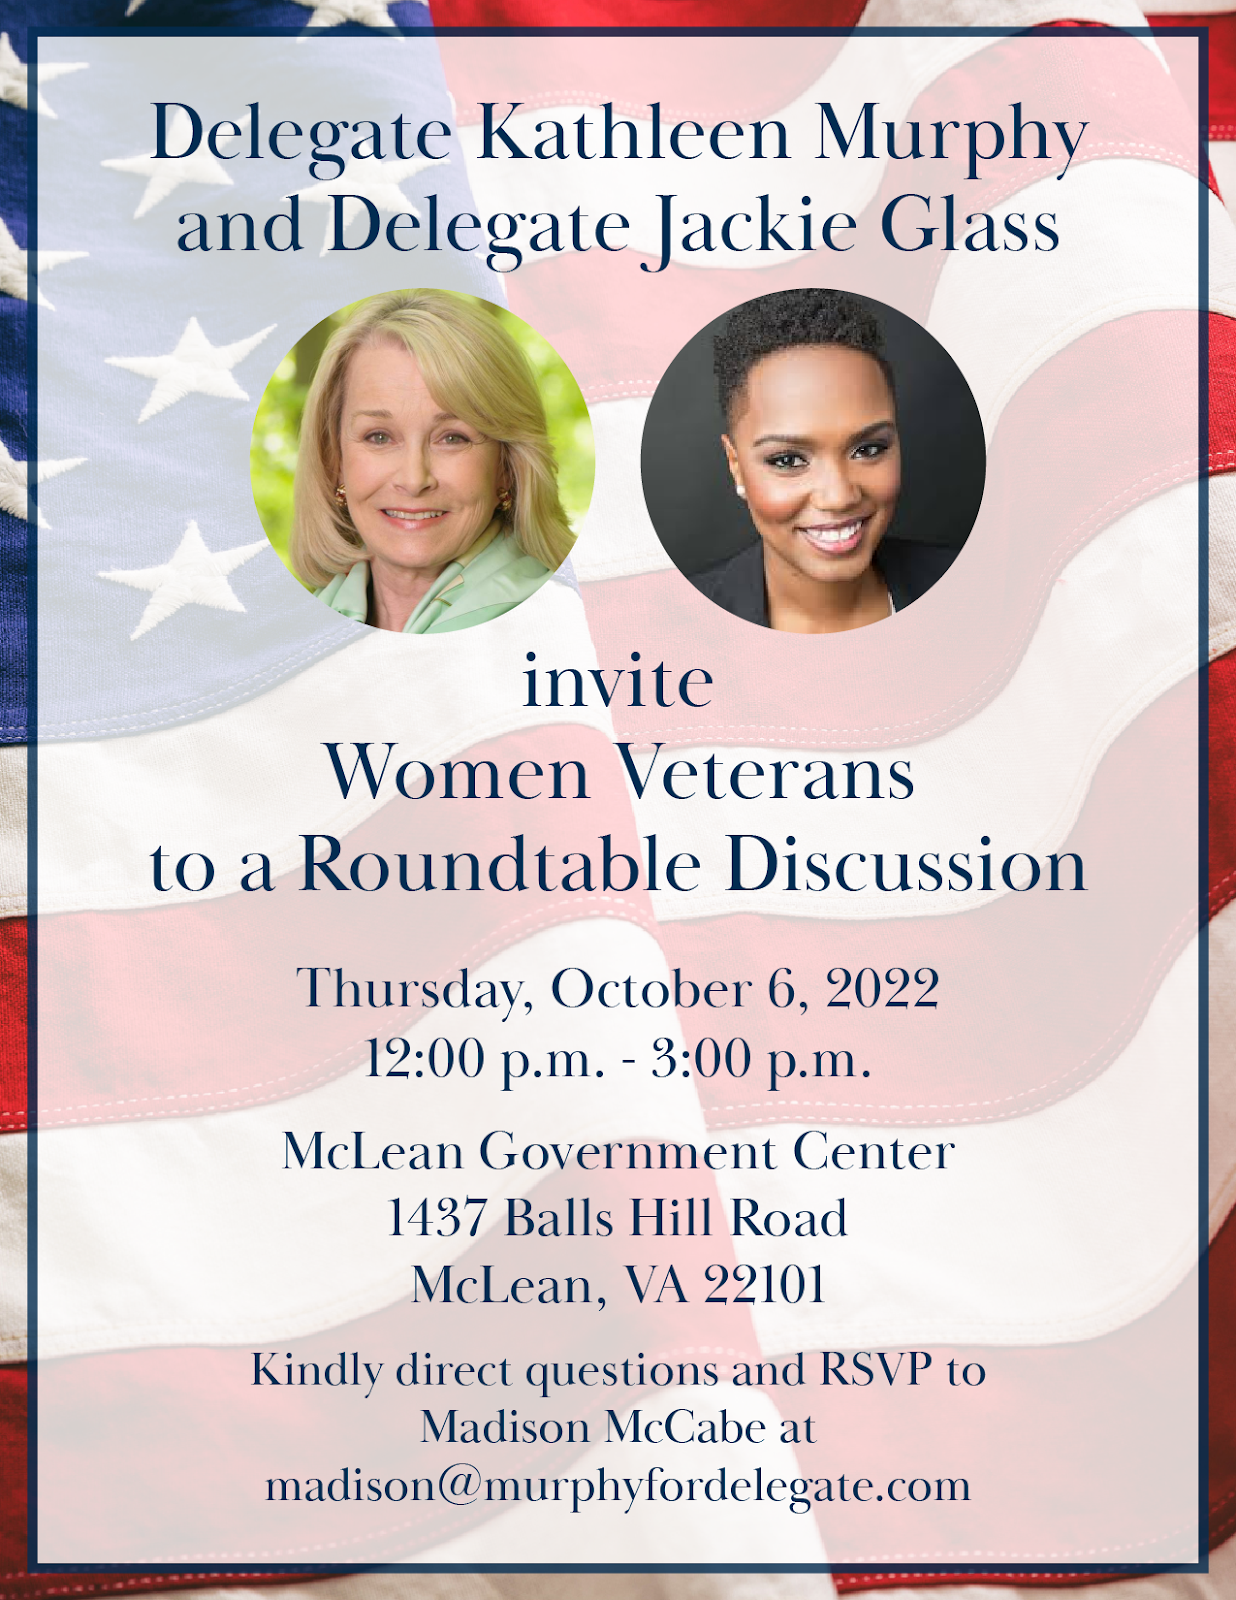 Delegate Kathleen Murphy and Delegate Jackie Glass invite Women Veterans to a Roundtable Discussion